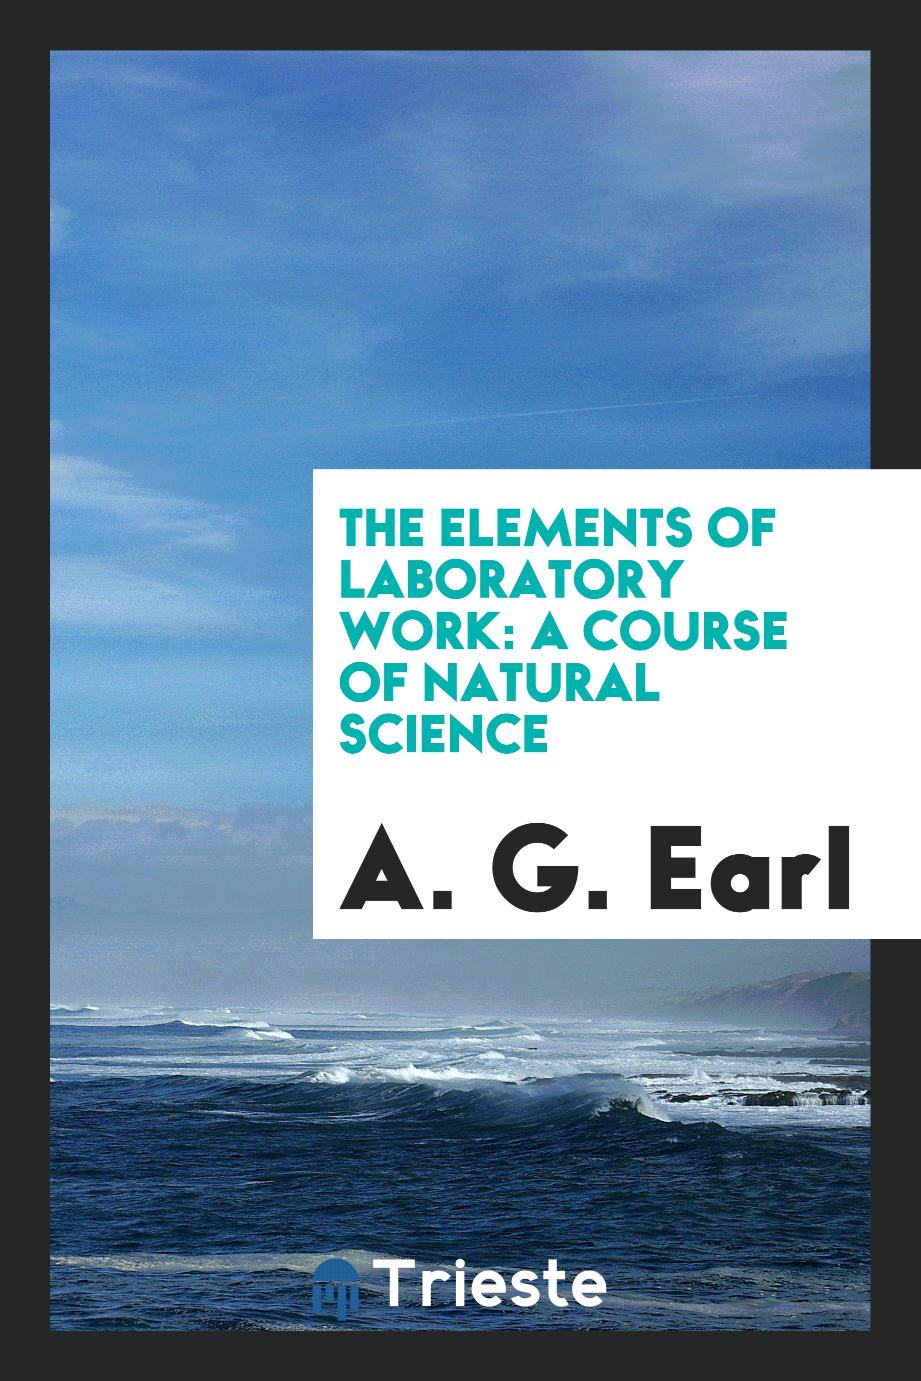 A. G. Earl - The elements of laboratory work: a course of natural science